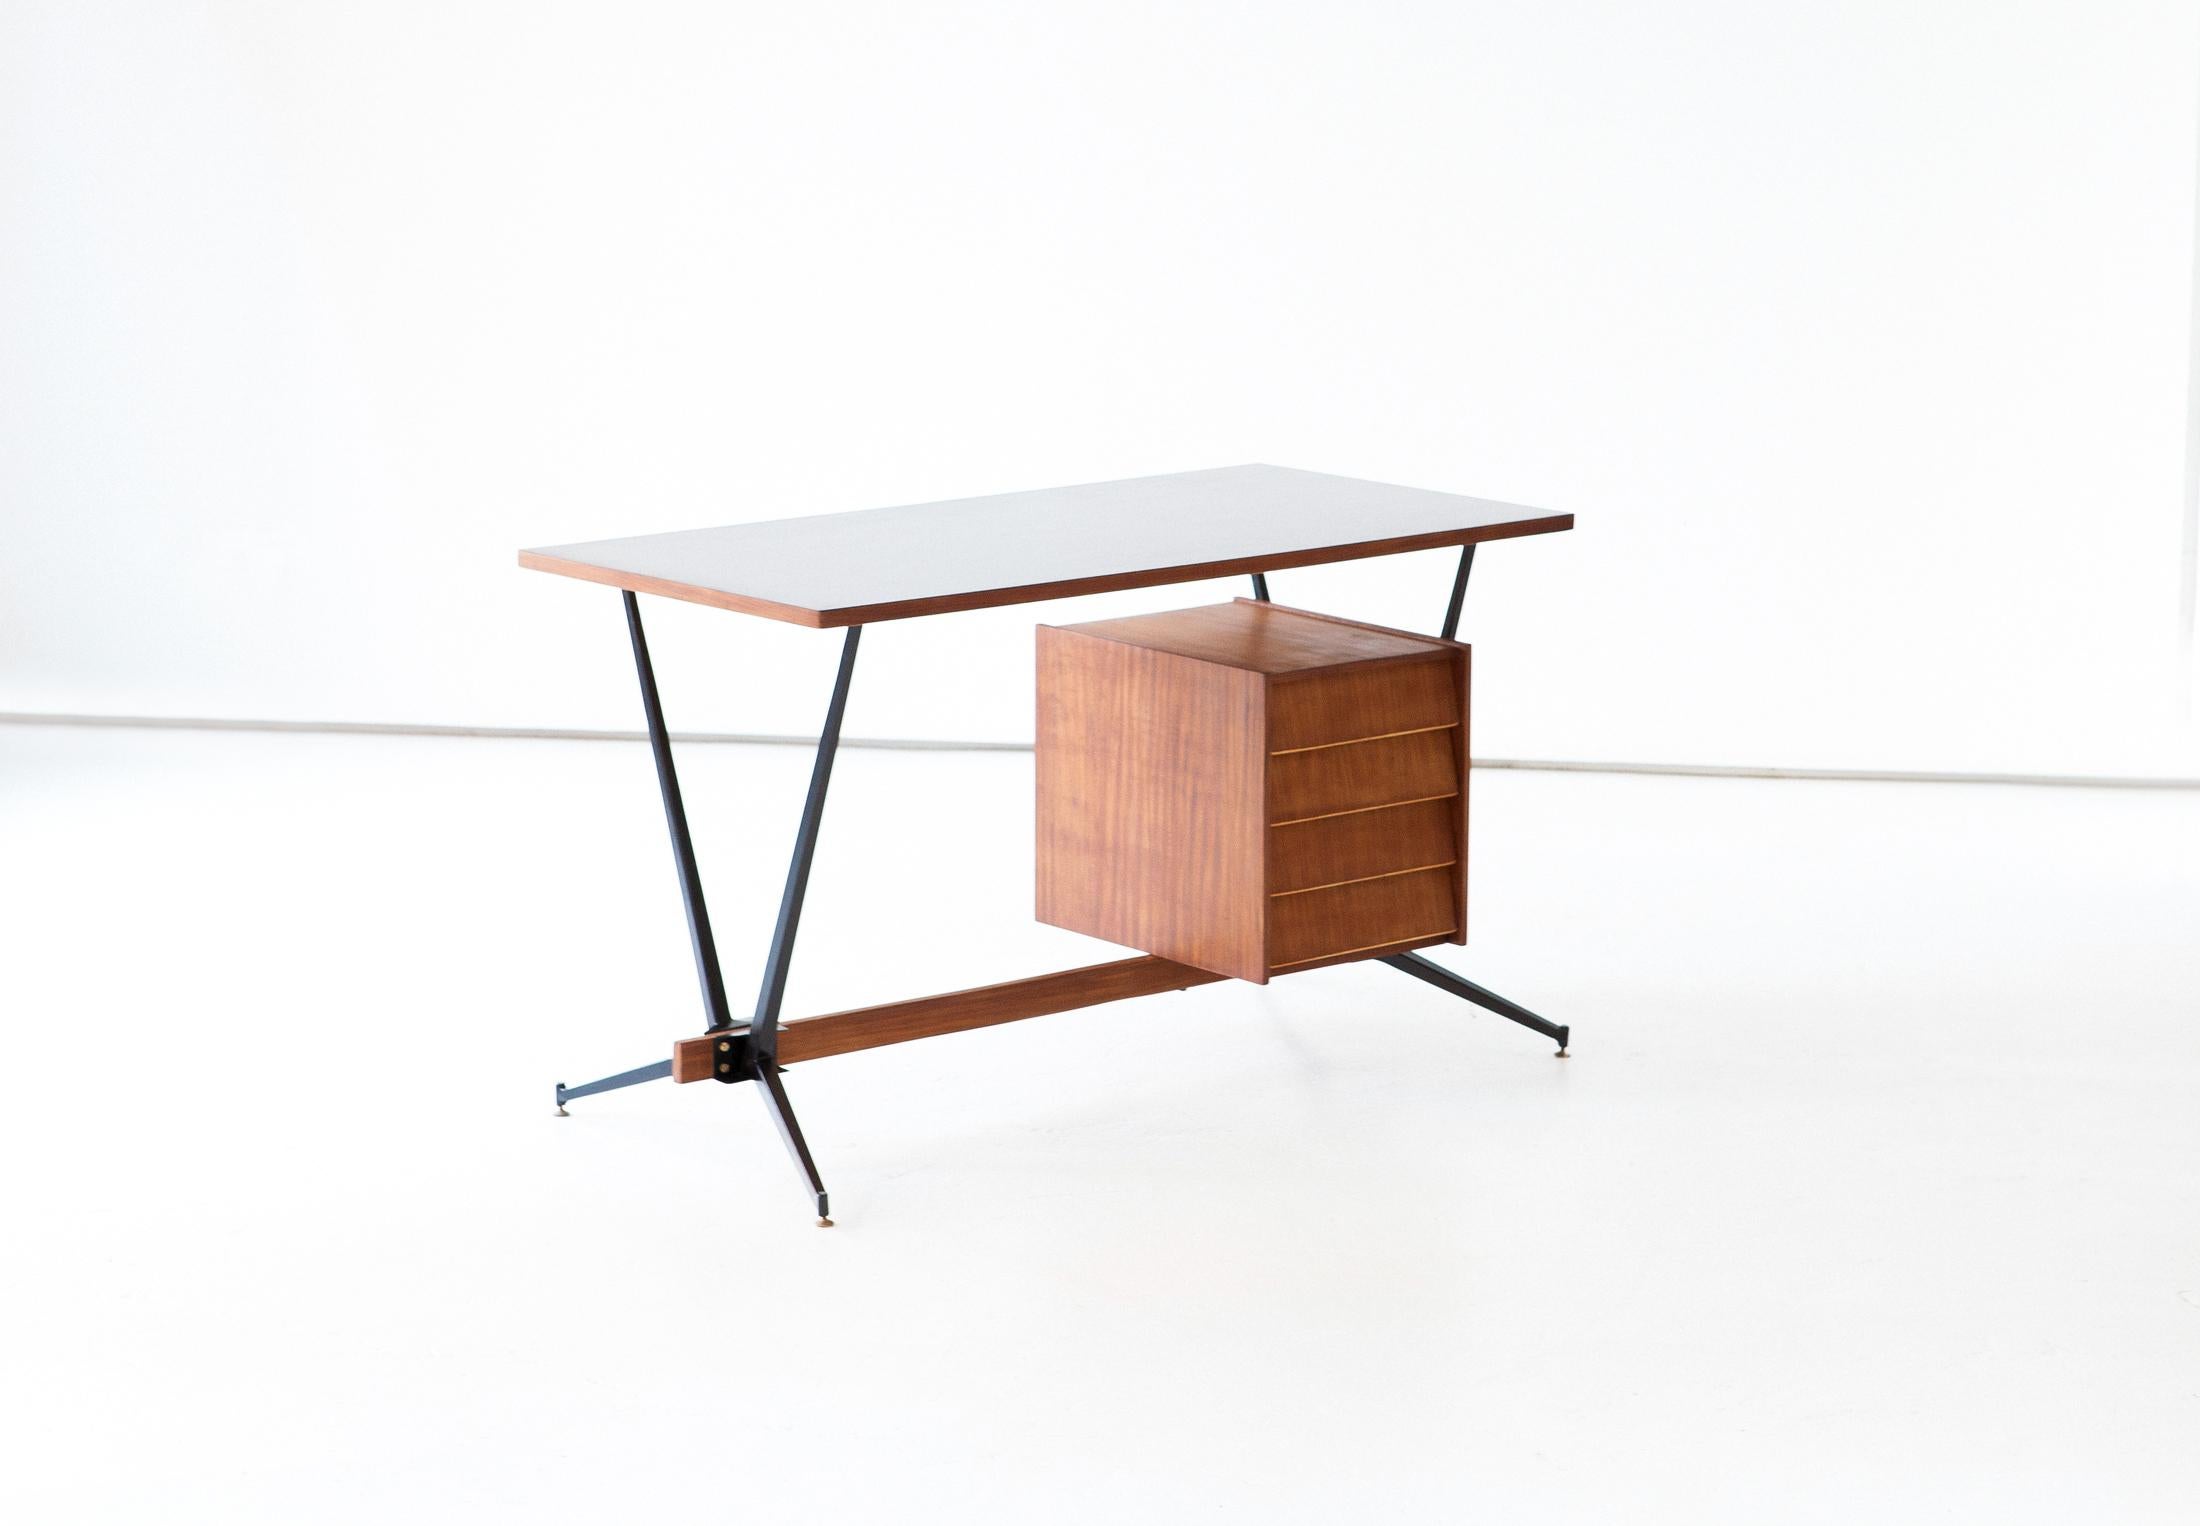 Mid-Century Modern desk, manufactured in Italy in the 1950s,

This table with chest of drawers feature a black enameled iron frame , bruno teak wood veneer, black top and little brass details

completely restored :
Wooden parts sanded and oil